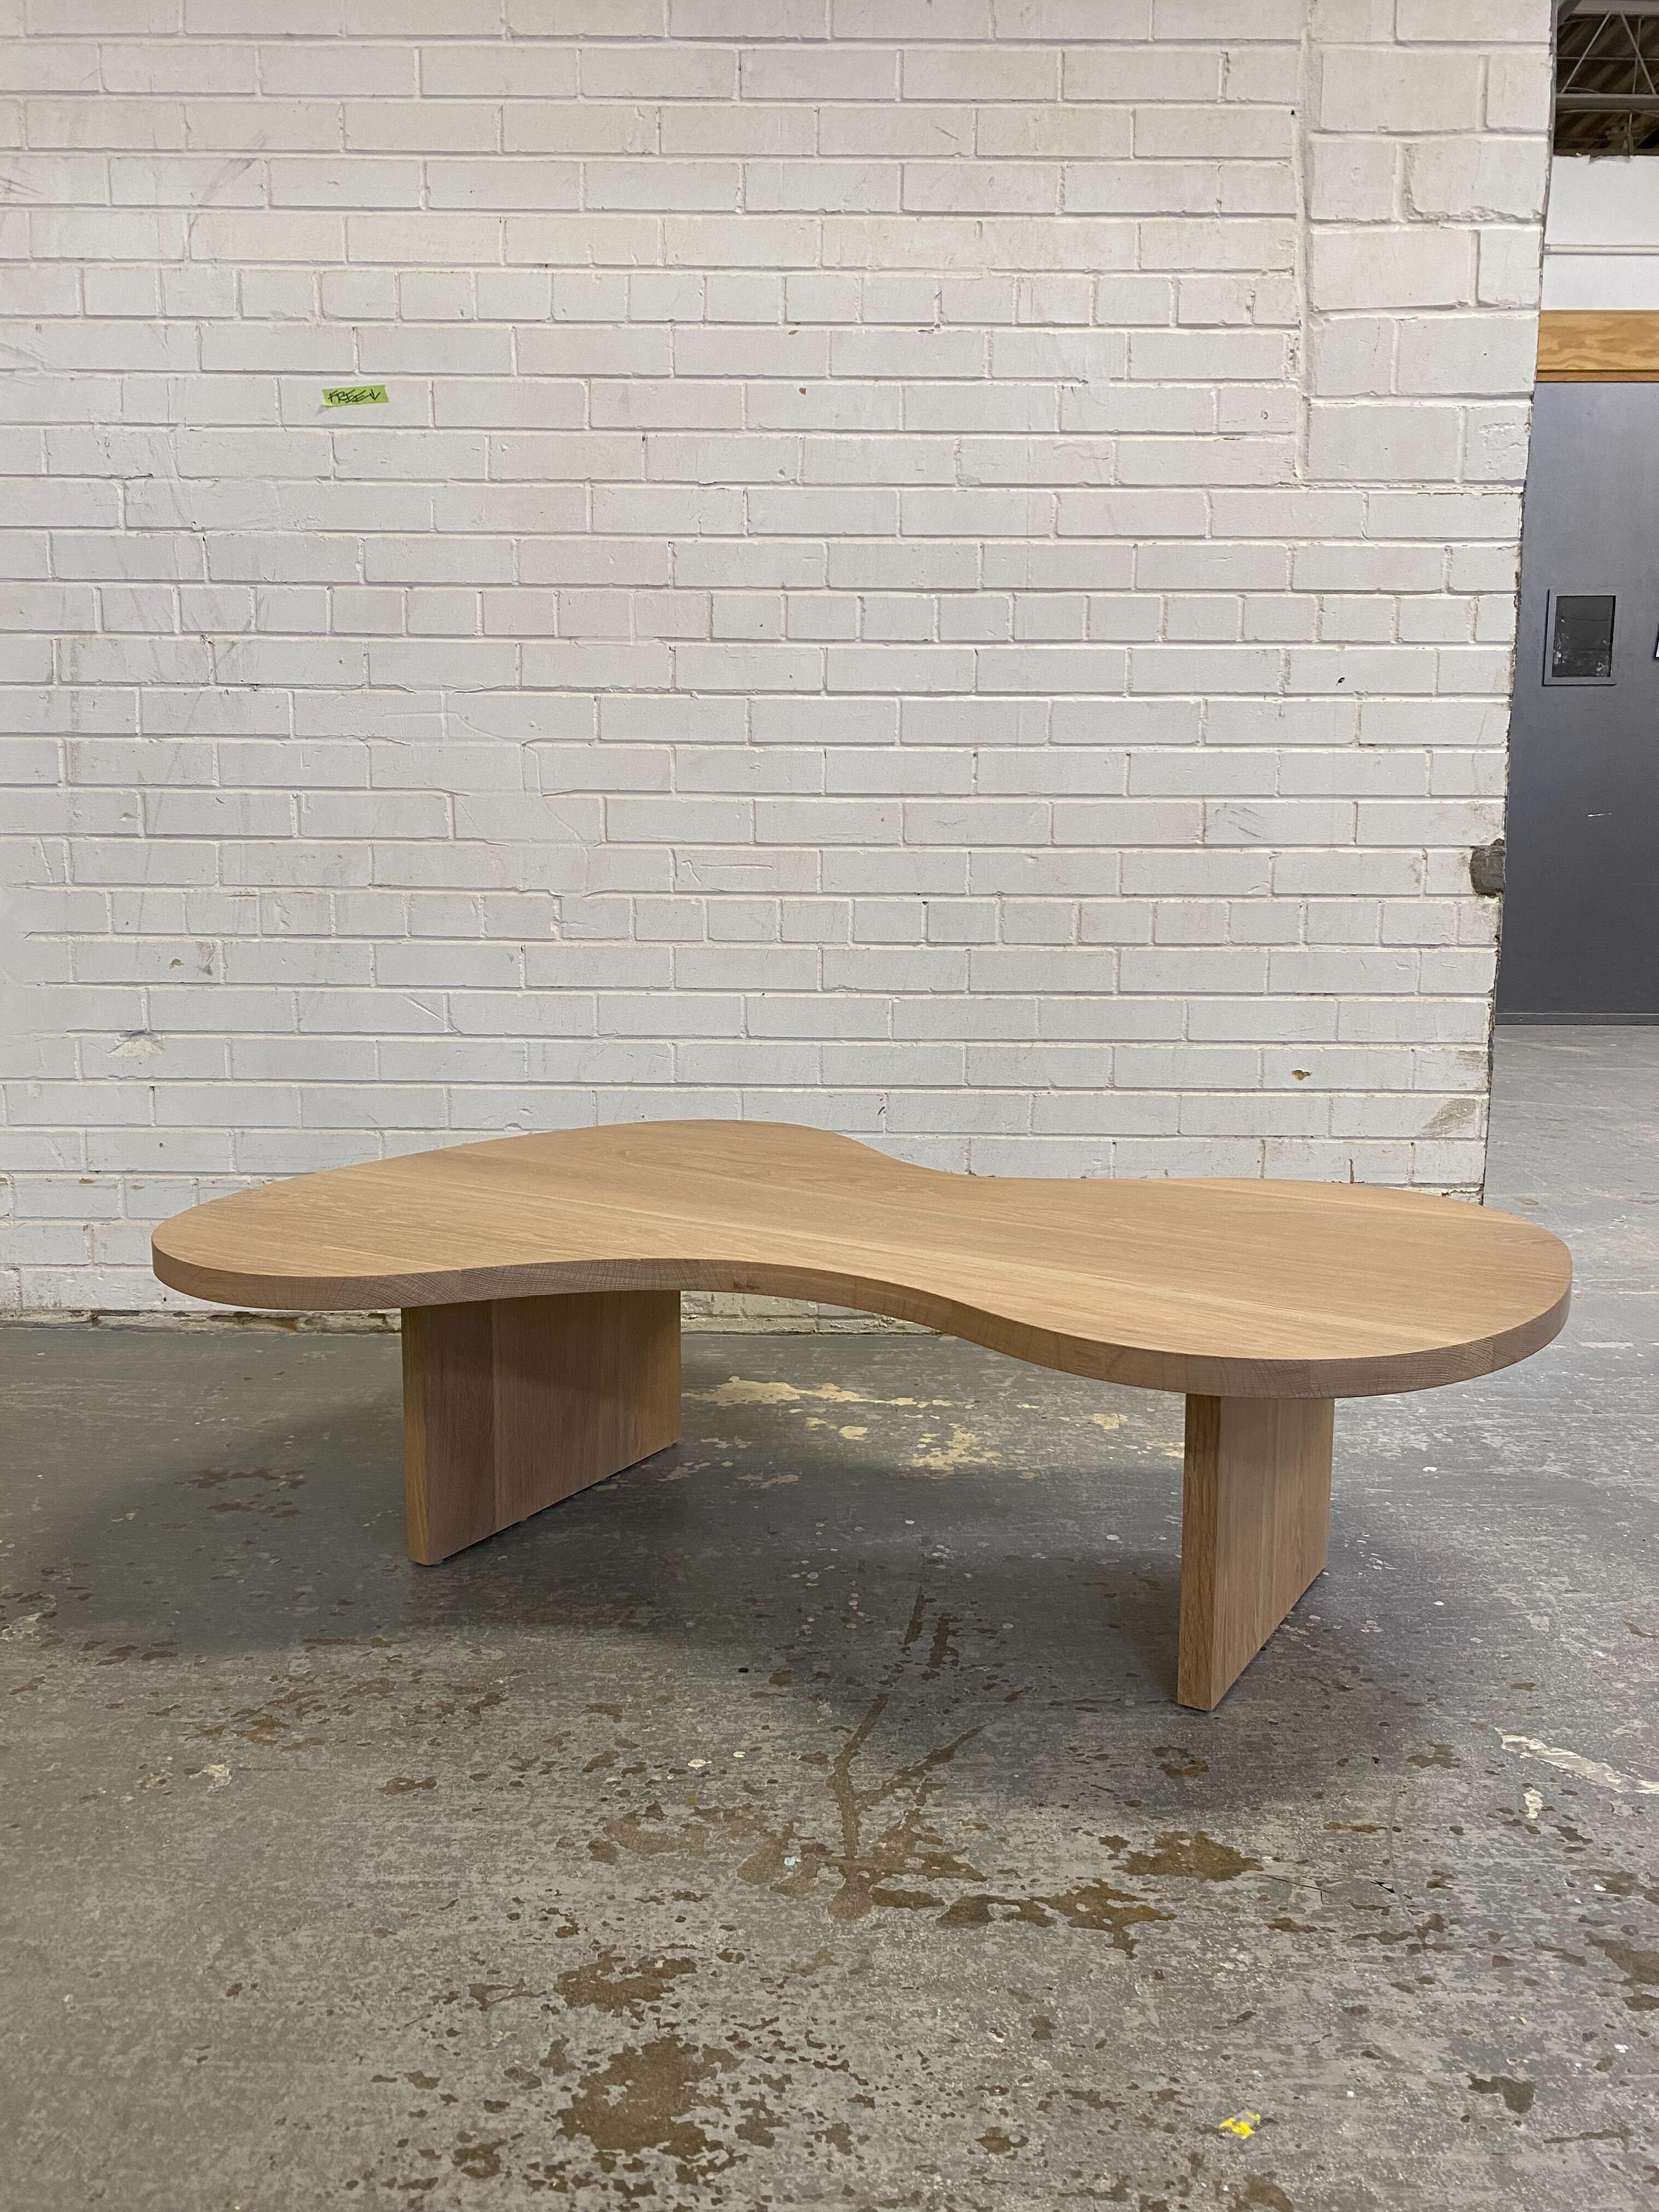 Handmade in Toronto on by Mary Ratcliffe Studio & constructed out of solid flat cut white oak with an oiled natural finish, this curvy yet contemporary piece makes for the perfect coffee table or centre piece. 

As we make everything by hand, in